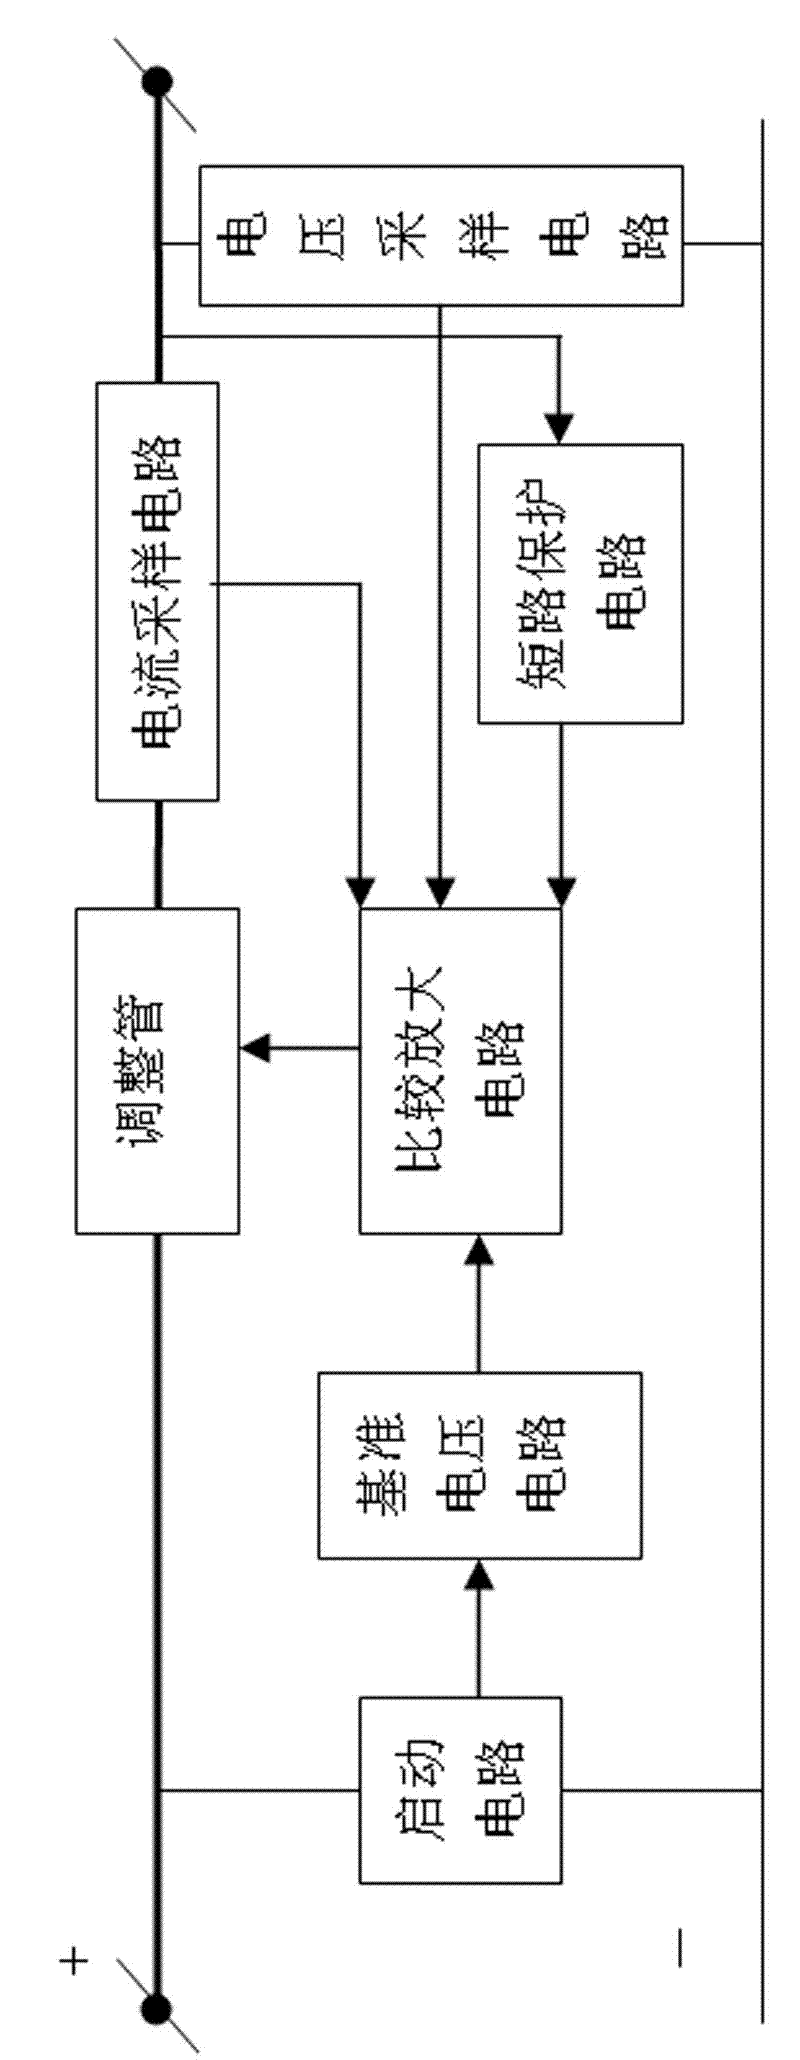 Linear regulator with current limiting short circuit protection function